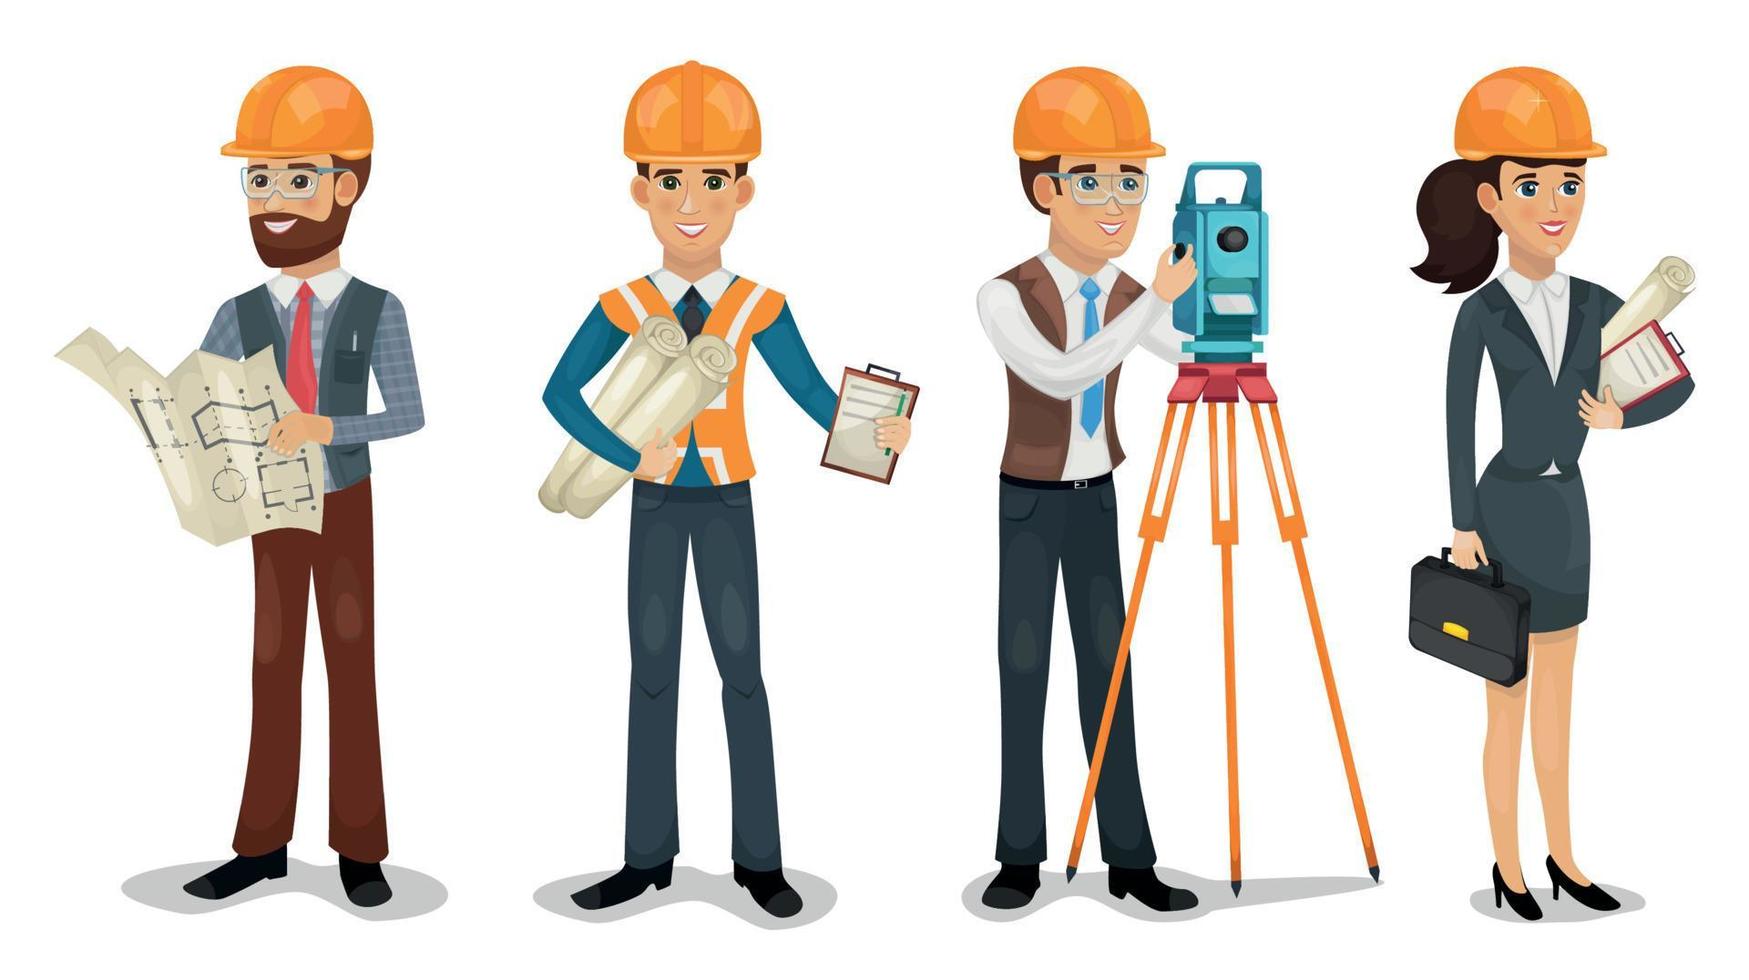 Set of cartoon characters. Civil engineer, surveyor, architect and construction workers isolated vector illustration.